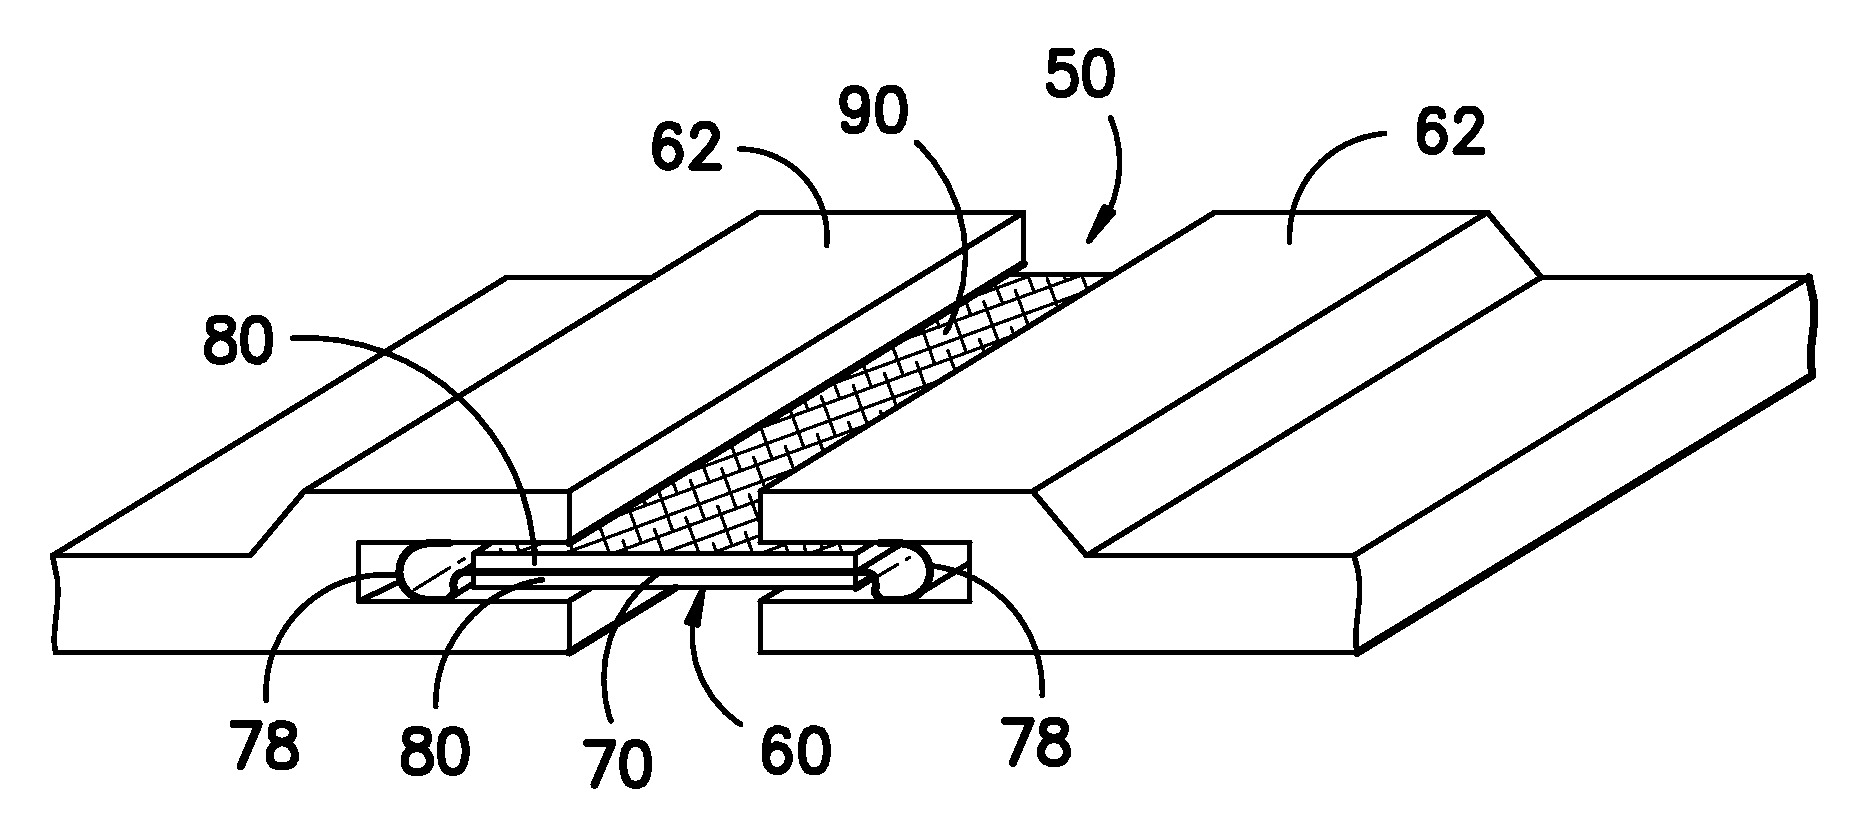 Sealing device and method for providing a seal in a turbine system